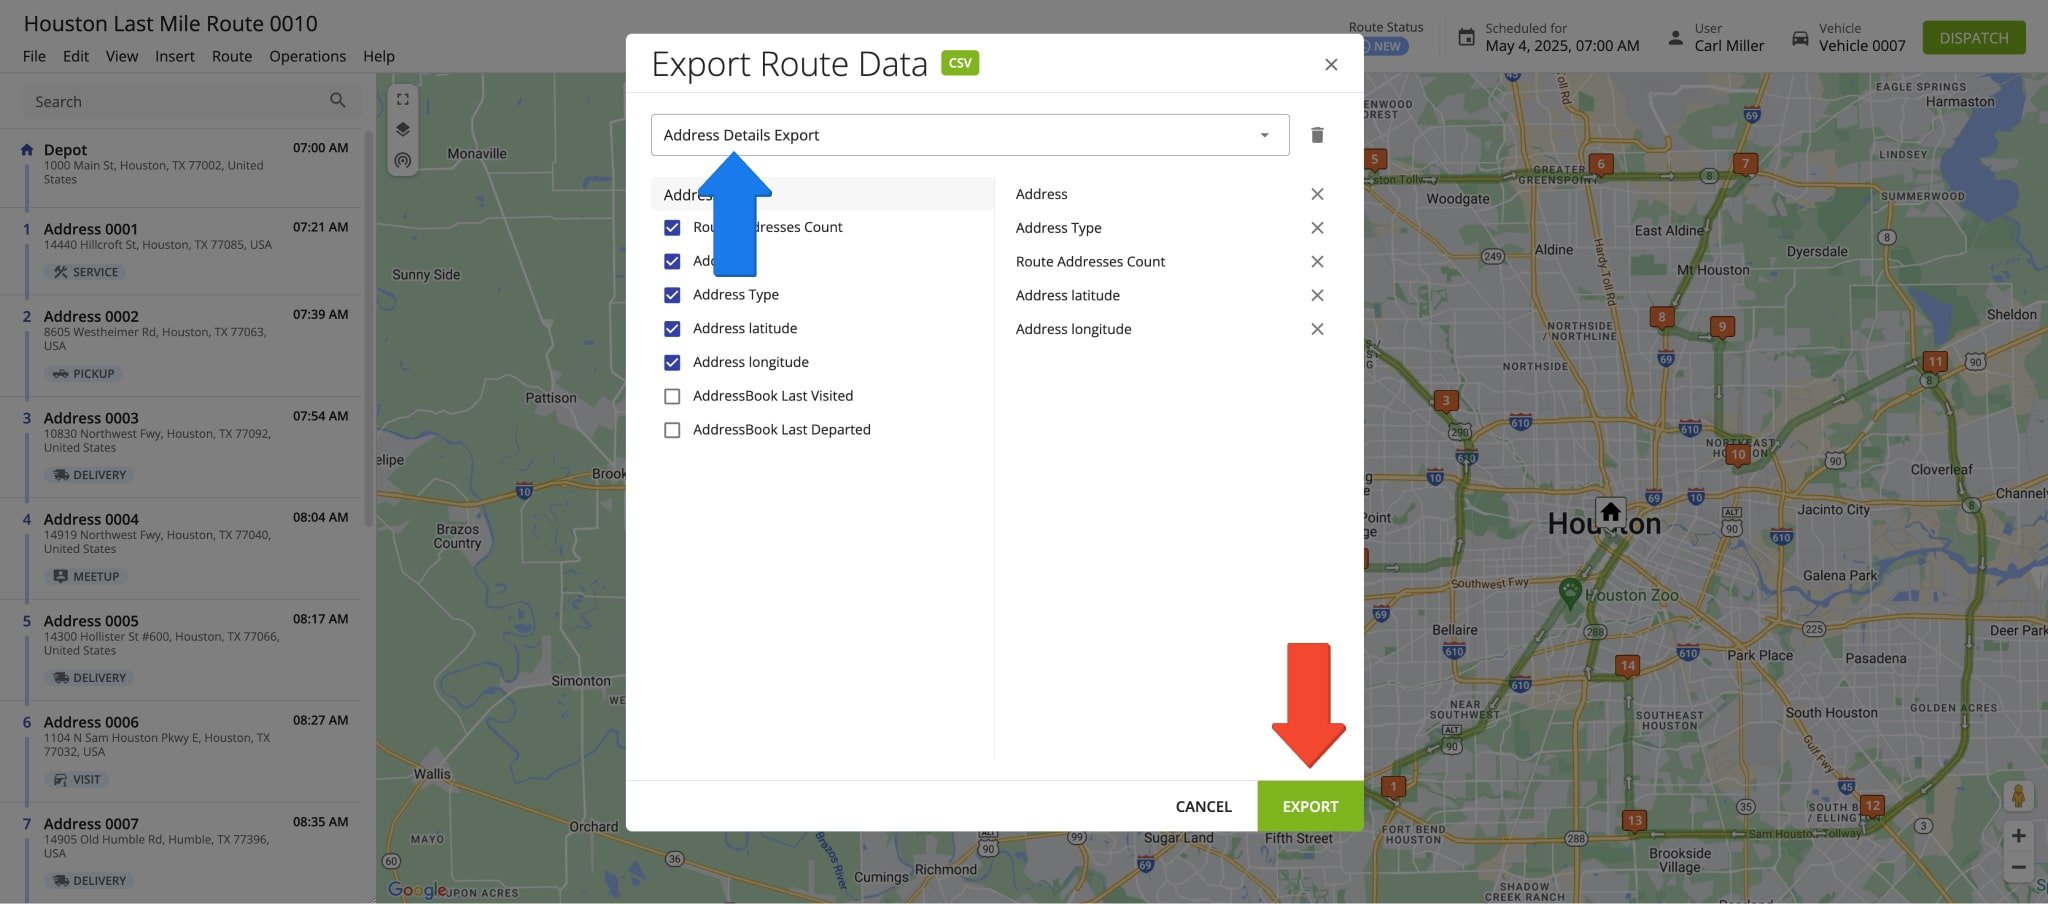 After selecting route export items, save route export profiles by writing a custom profile name and clicking "Export".